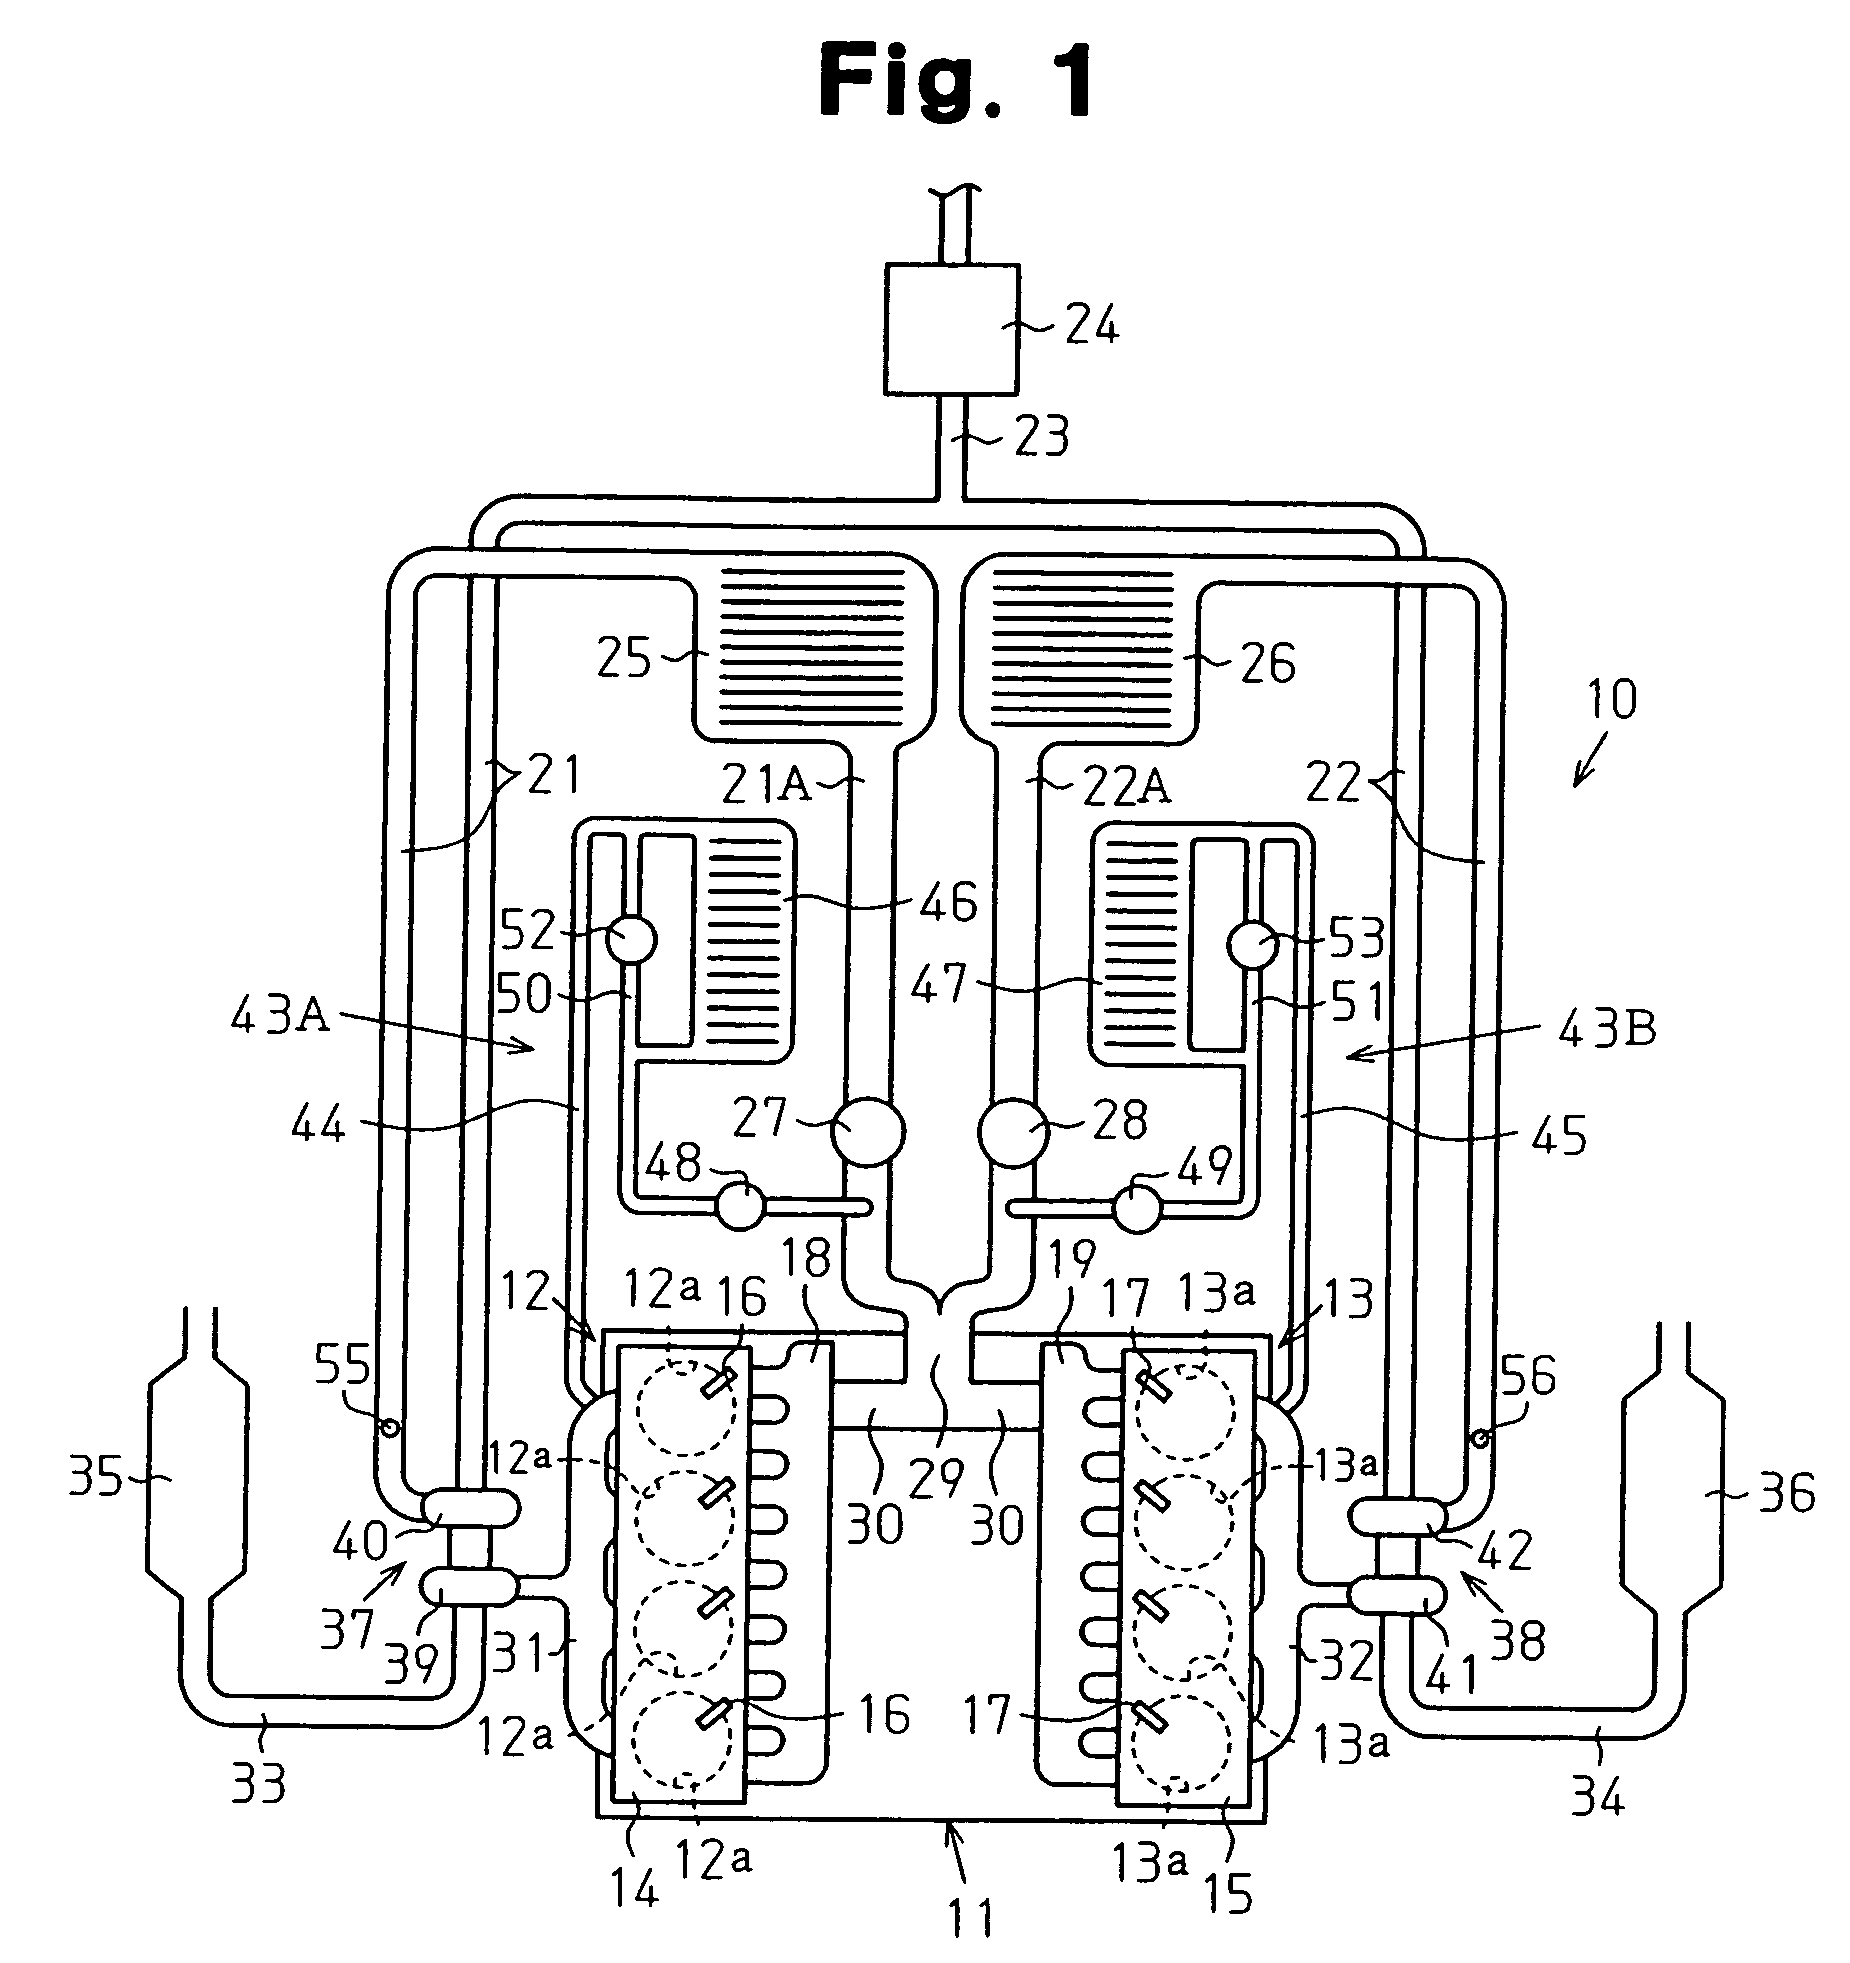 Trouble diagnosis apparatus for supercharger of internal combustion engine